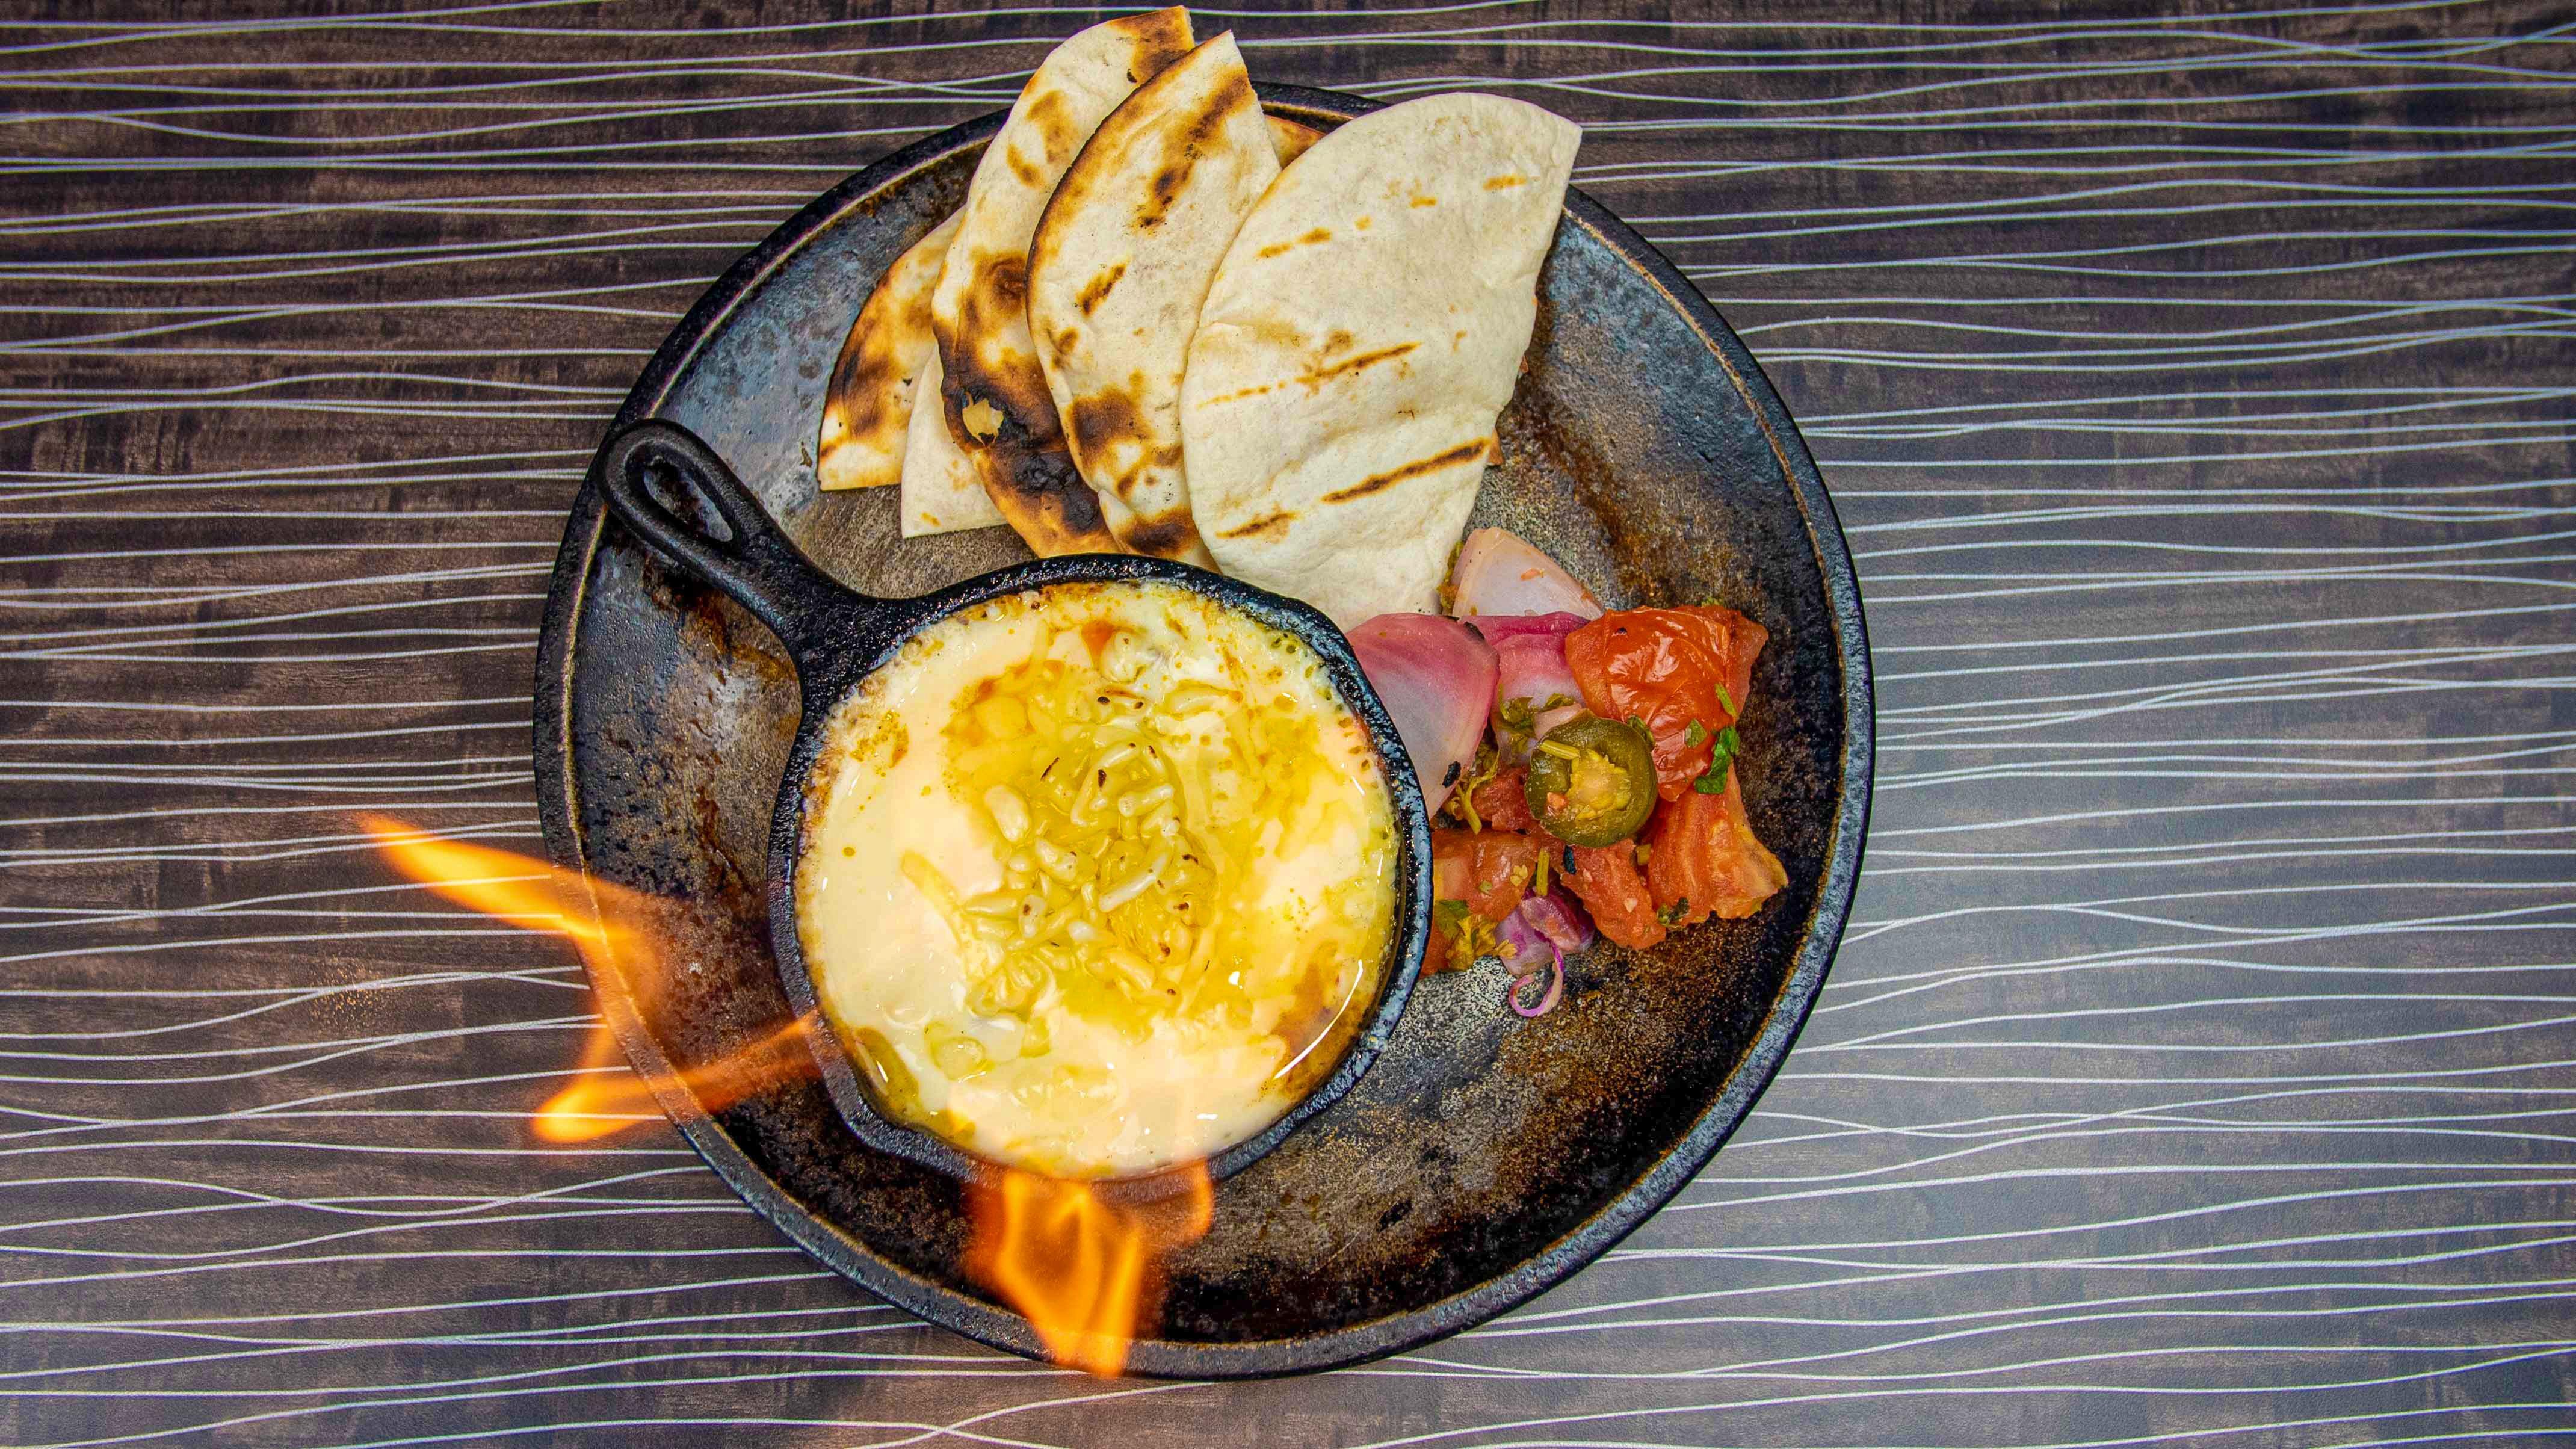 Fired Queso Fundido